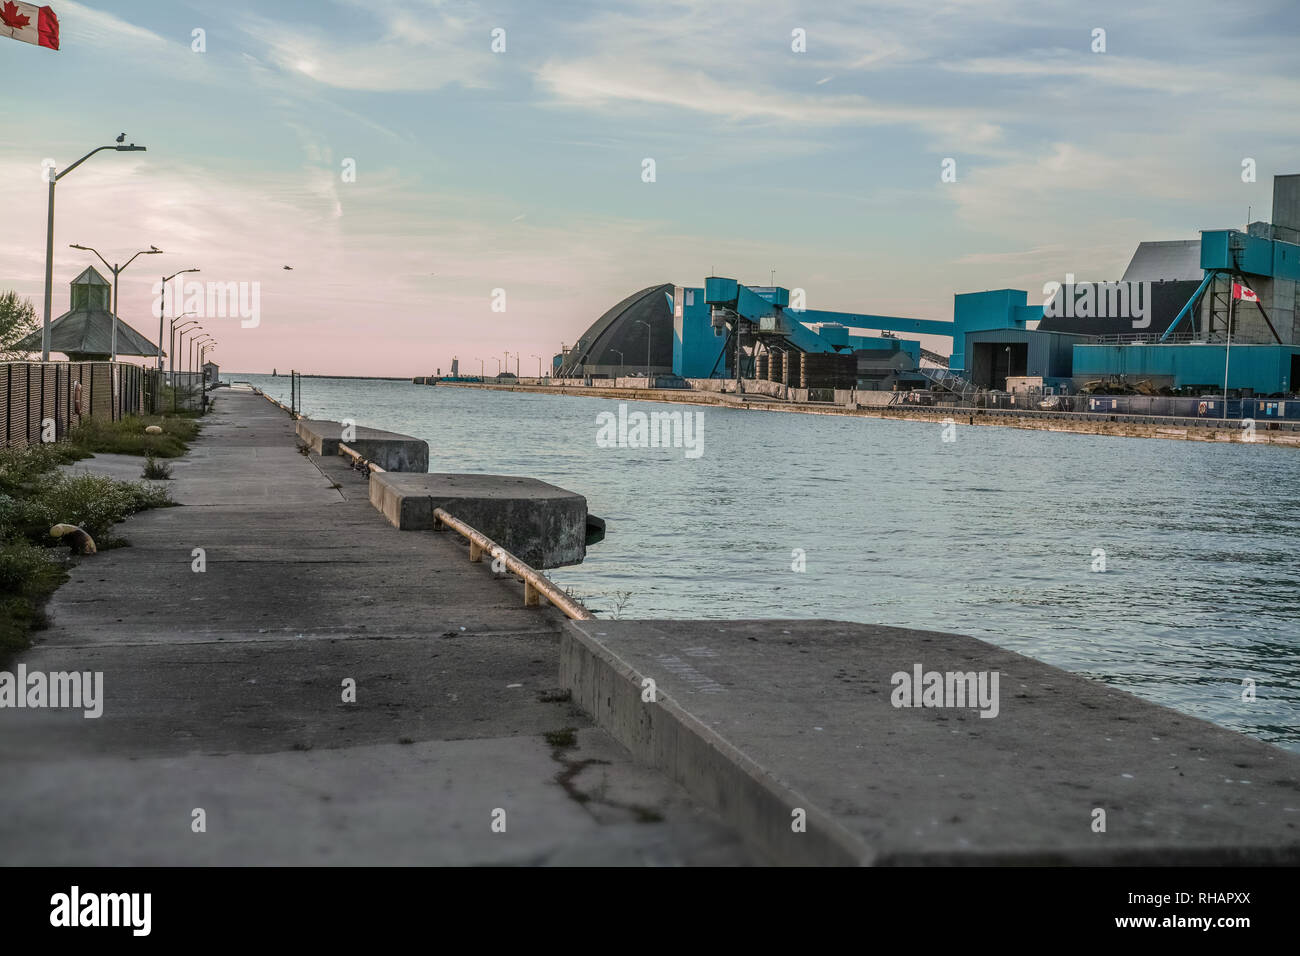 View of the Goderich Port in Ontario, Canada. Stock Photo